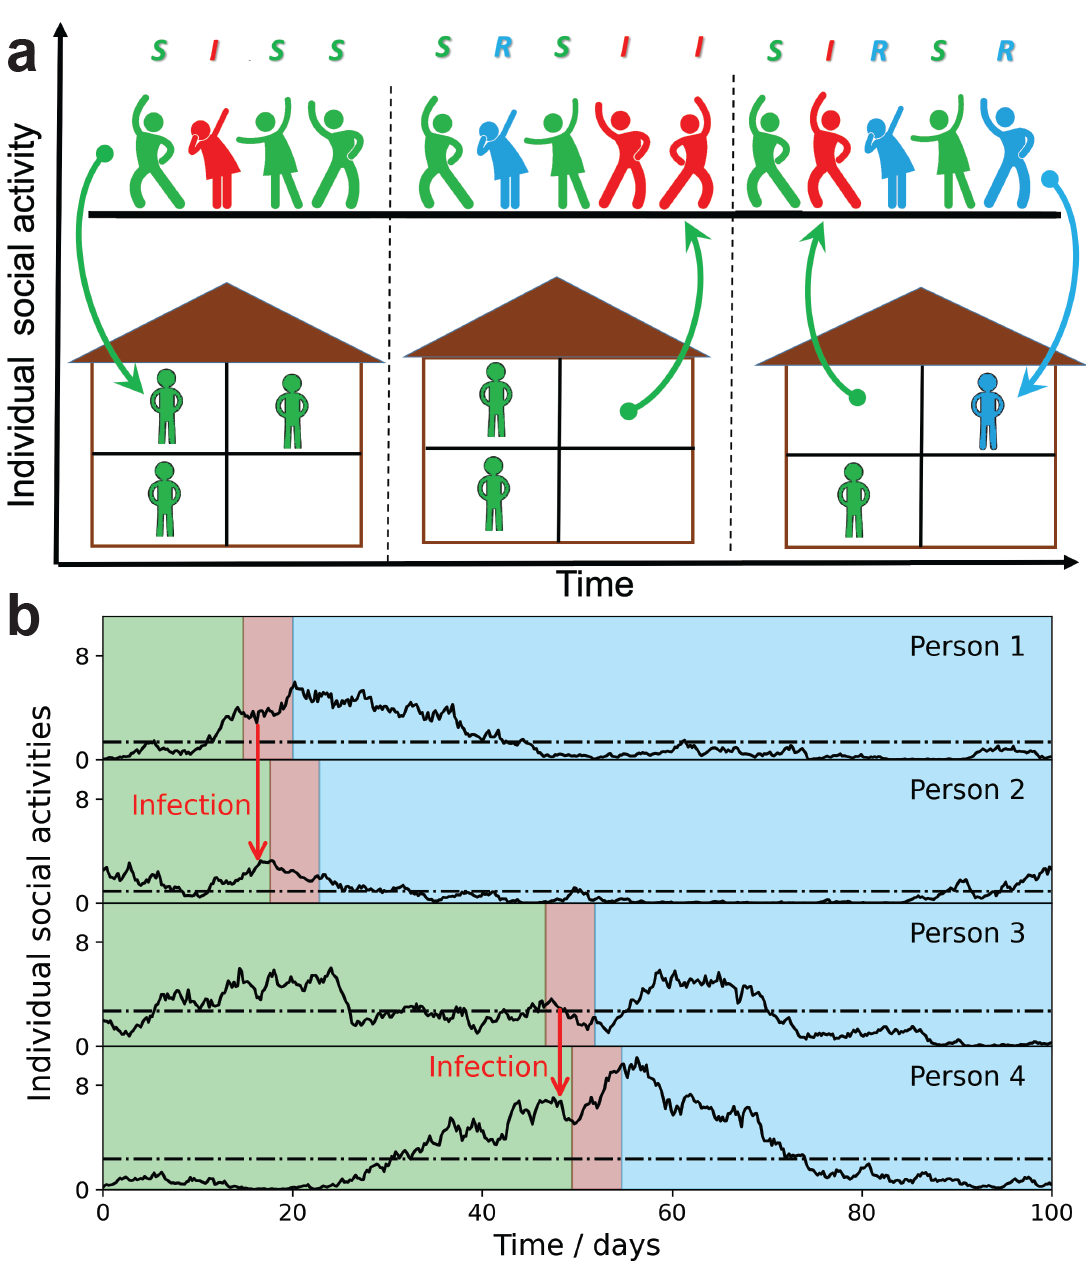 Figure 1 in the published paper depicts a schematic illustration of the Stochastic Social Activity model in which each individual changes their social activity over time. People with low social activity (depicted as socially isolated figures at home) occasionally increase their level of activity (depicted as at a party). The average activity in the population remains the same over time, but individuals constantly change their activity levels from low to high (arrows pointing up) and back (arrows pointing down). Individuals are colored according to their state: susceptible = green, infected = red, and recovered/removed = blue. The epidemic is fueled by constant replenishment of the susceptible population when individuals move from the low-activity state to high-activity settings. Virus transmission occurs predominantly between individuals having high current activity levels.  Credit: A. V. Tkachenko, et al., eLife, December 14, 2021